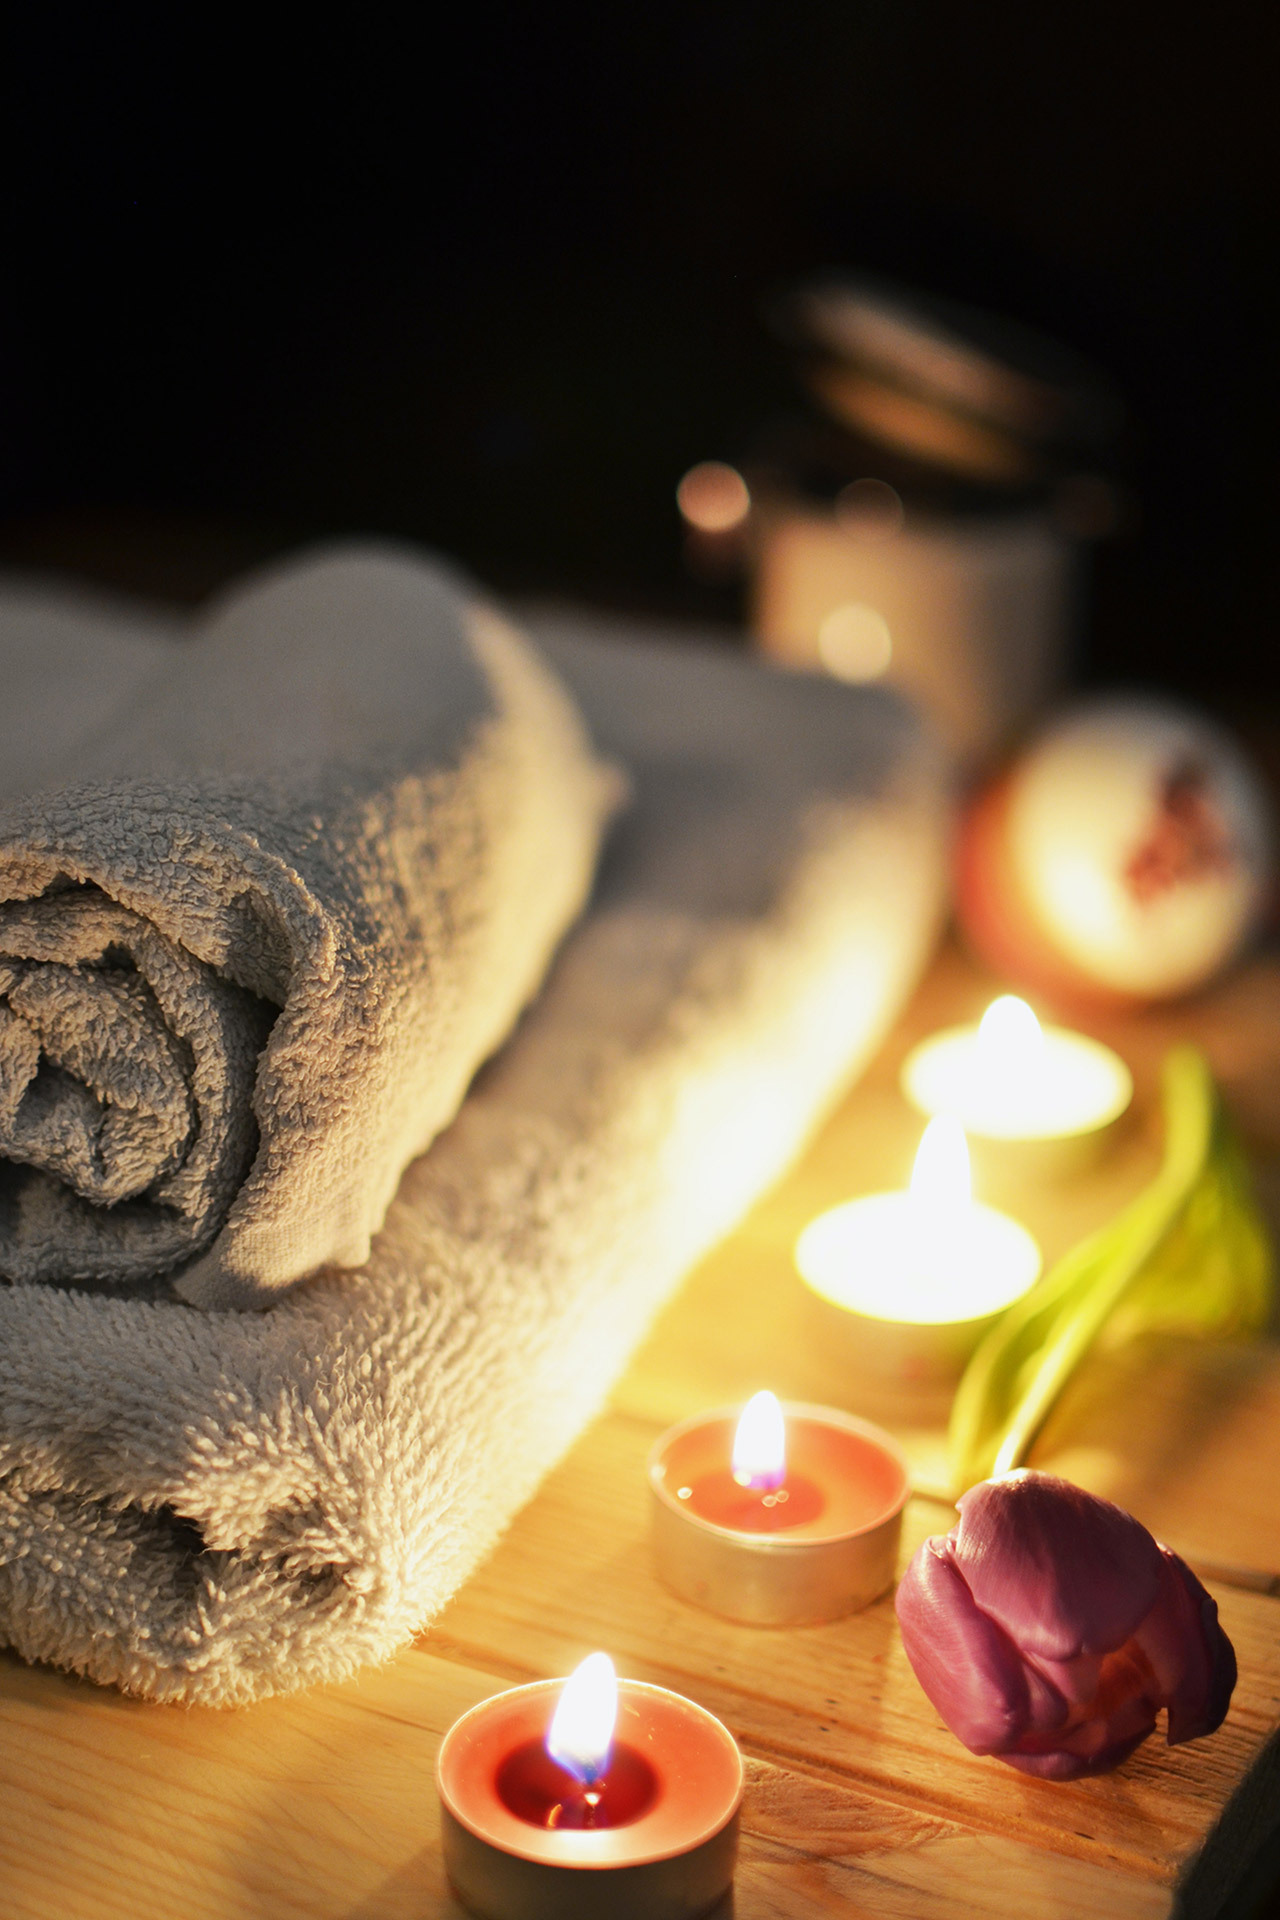 Photograph to signify self-care, showing a composition of soft towels, candles and flowers